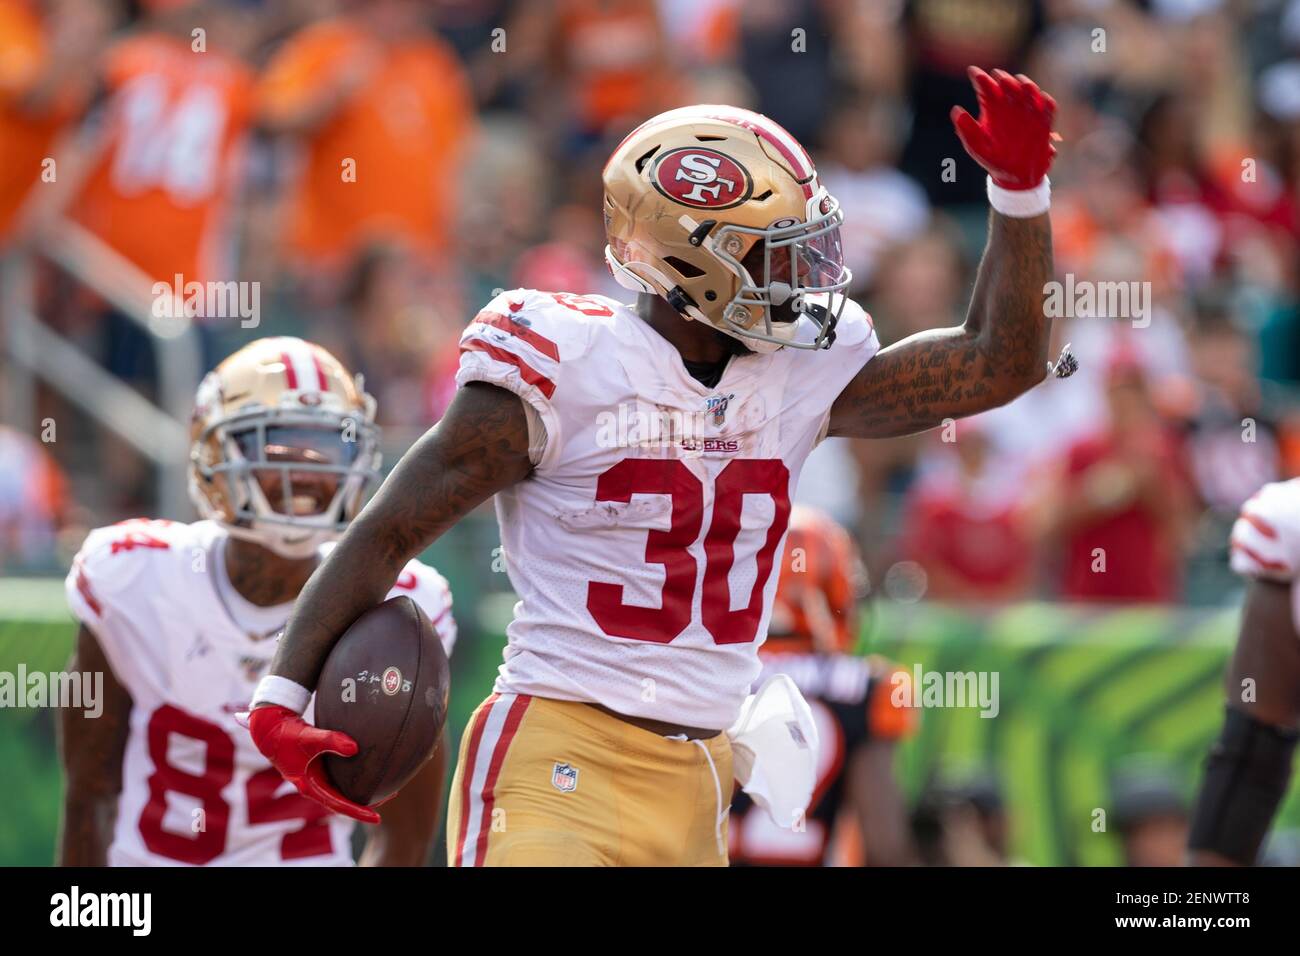 September 15, 2019: San Francisco 49ers running back Jeff Wilson Jr. (30)  celebrates during NFL football game action between the San Francisco 49ers  and the Cincinnati Bengals at Paul Brown Stadium on